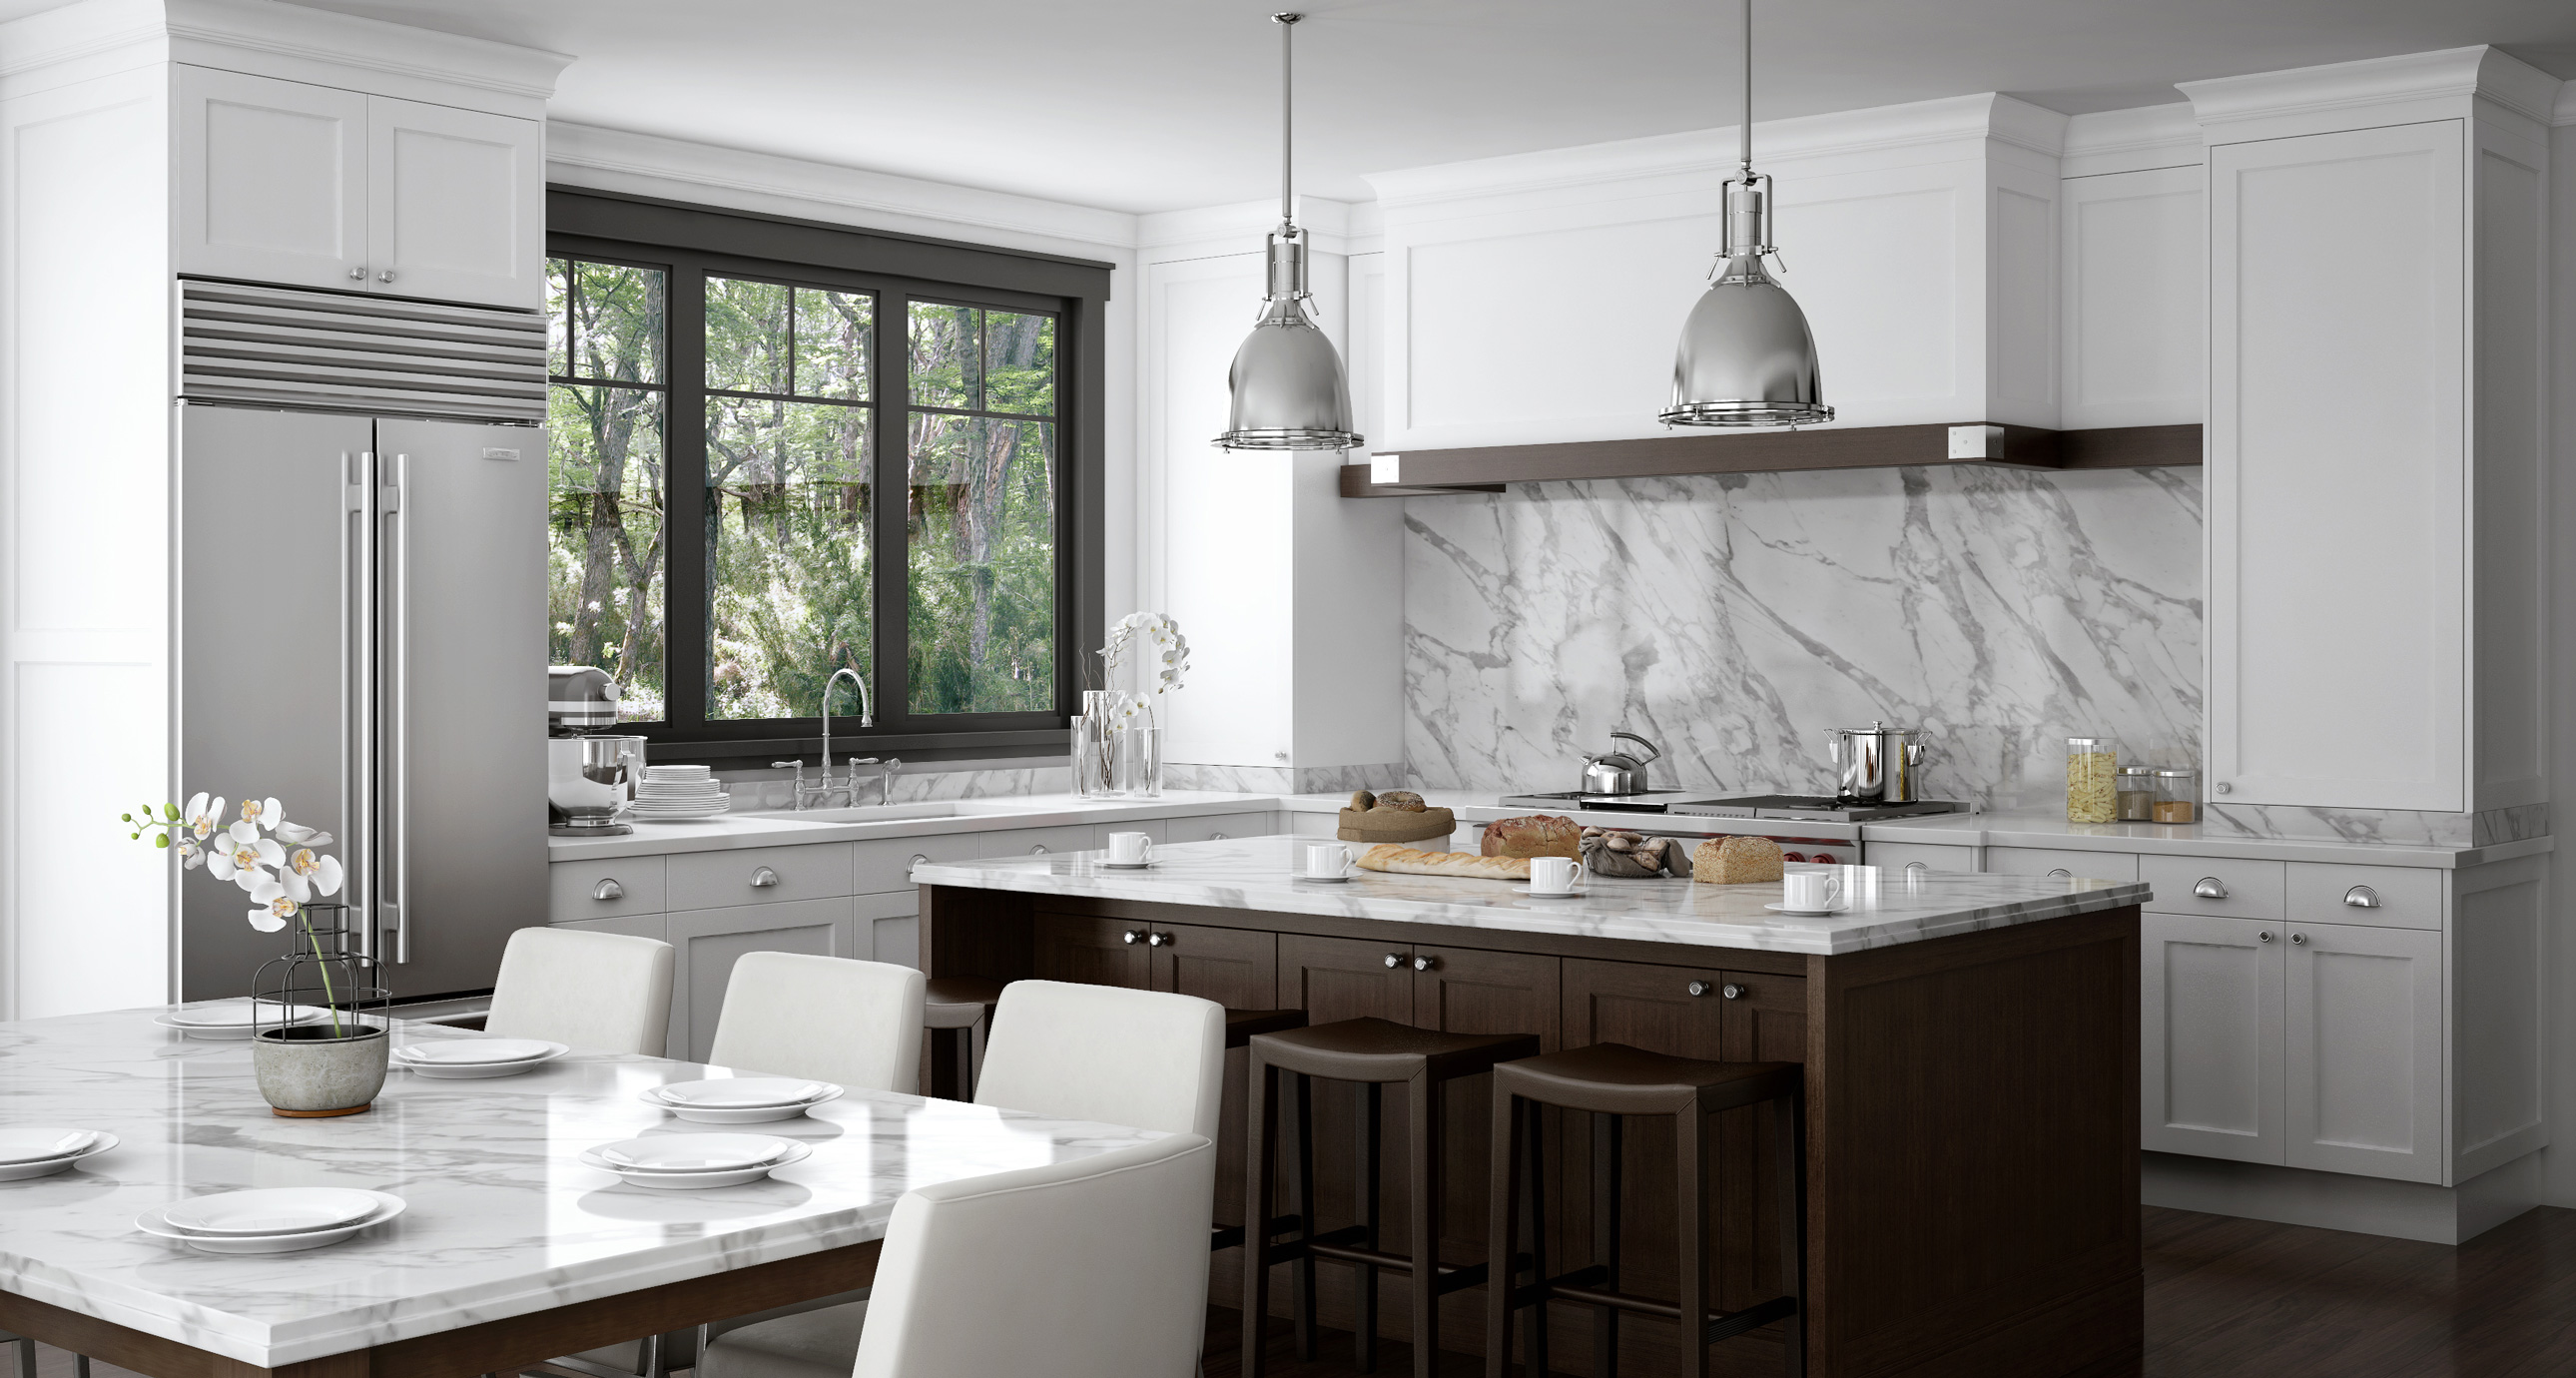 FUNCTIONAL AESTHETIC   Downsview Kitchens and Fine Custom ...